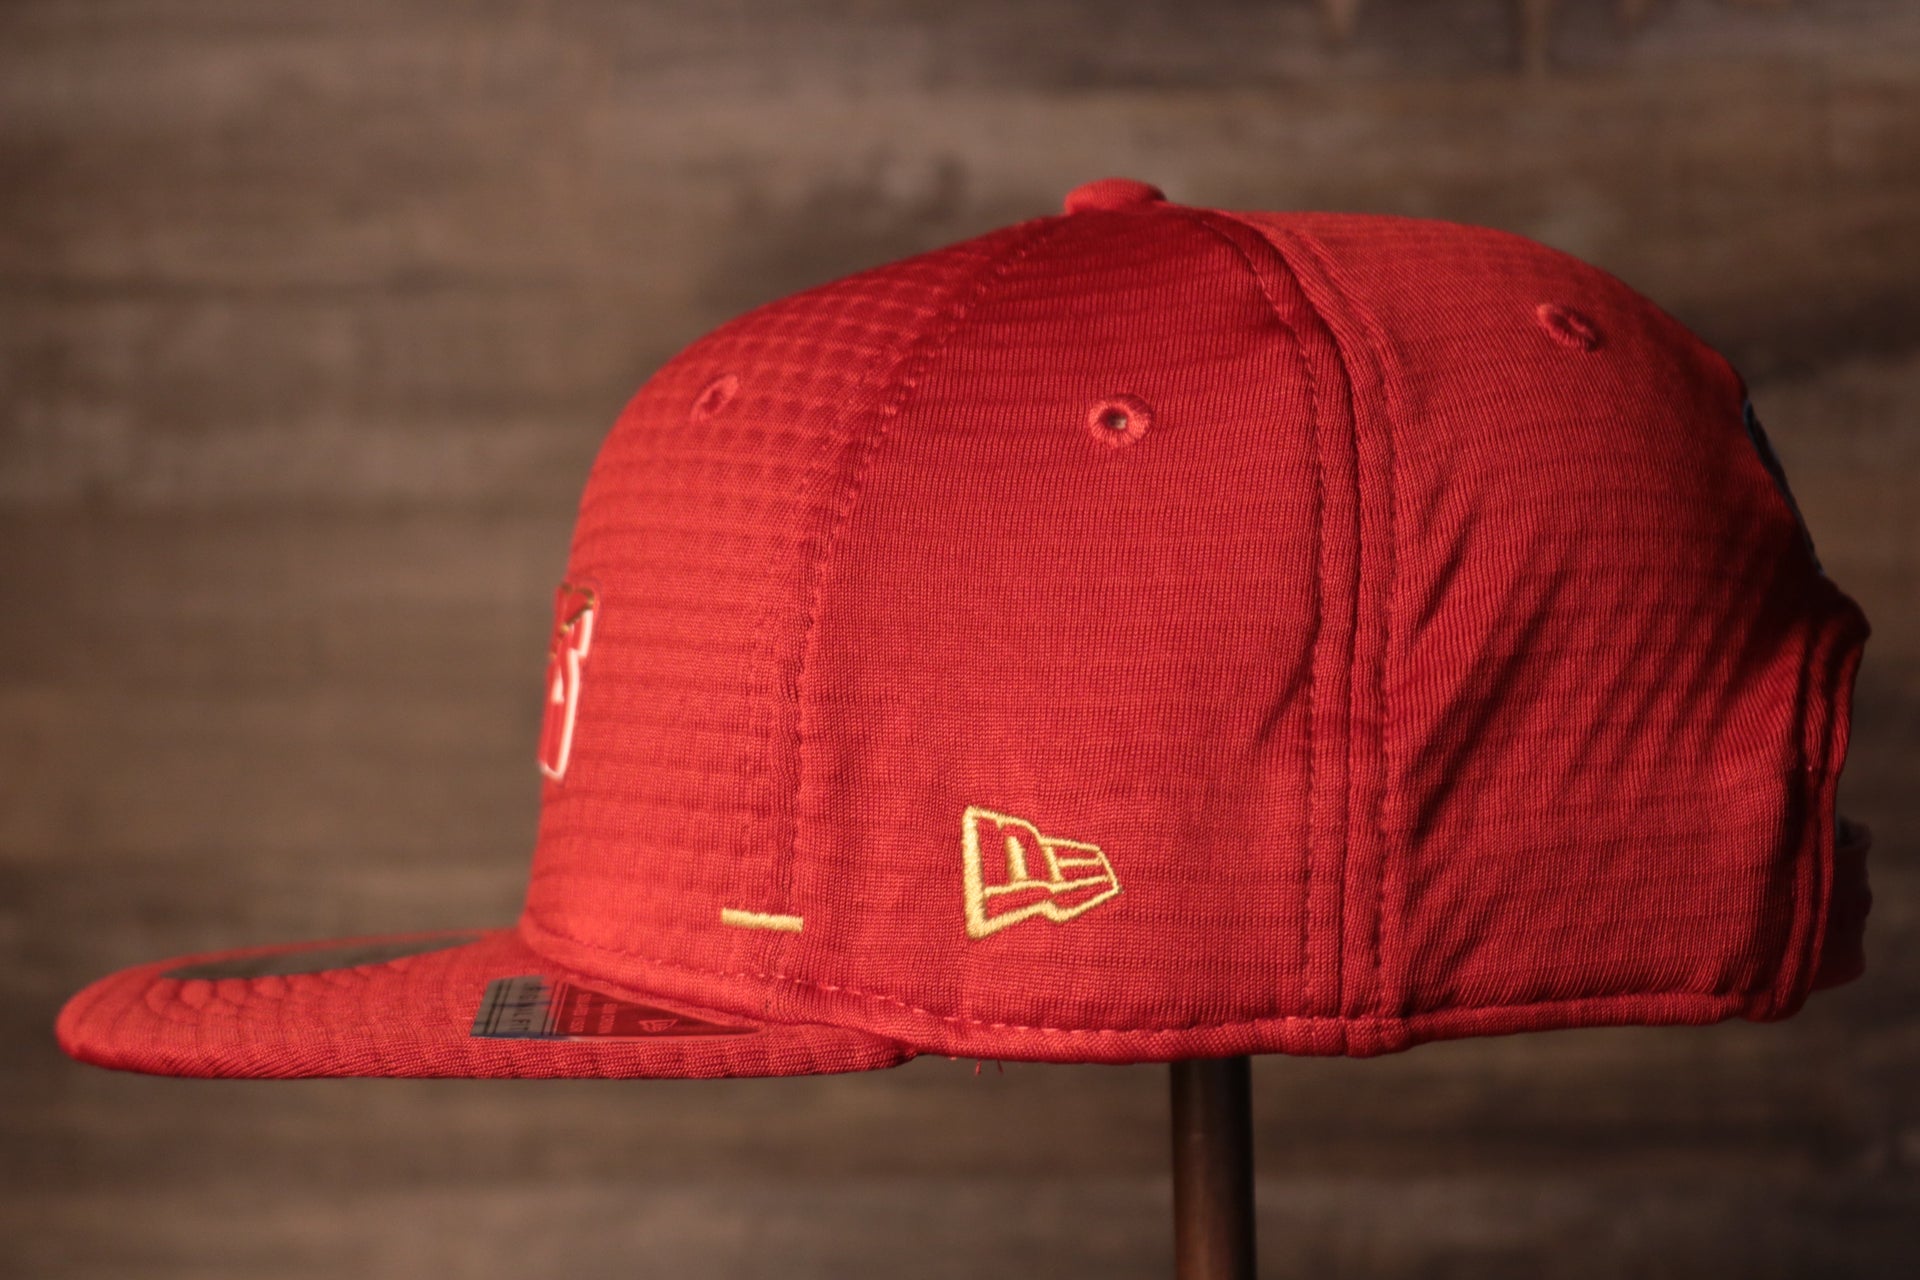 The wearers left side has the new era logo 49ers 2020 Training Camp Snapback Hat | San Francisco 2020 On-Field Red Training Camp Snap Cap